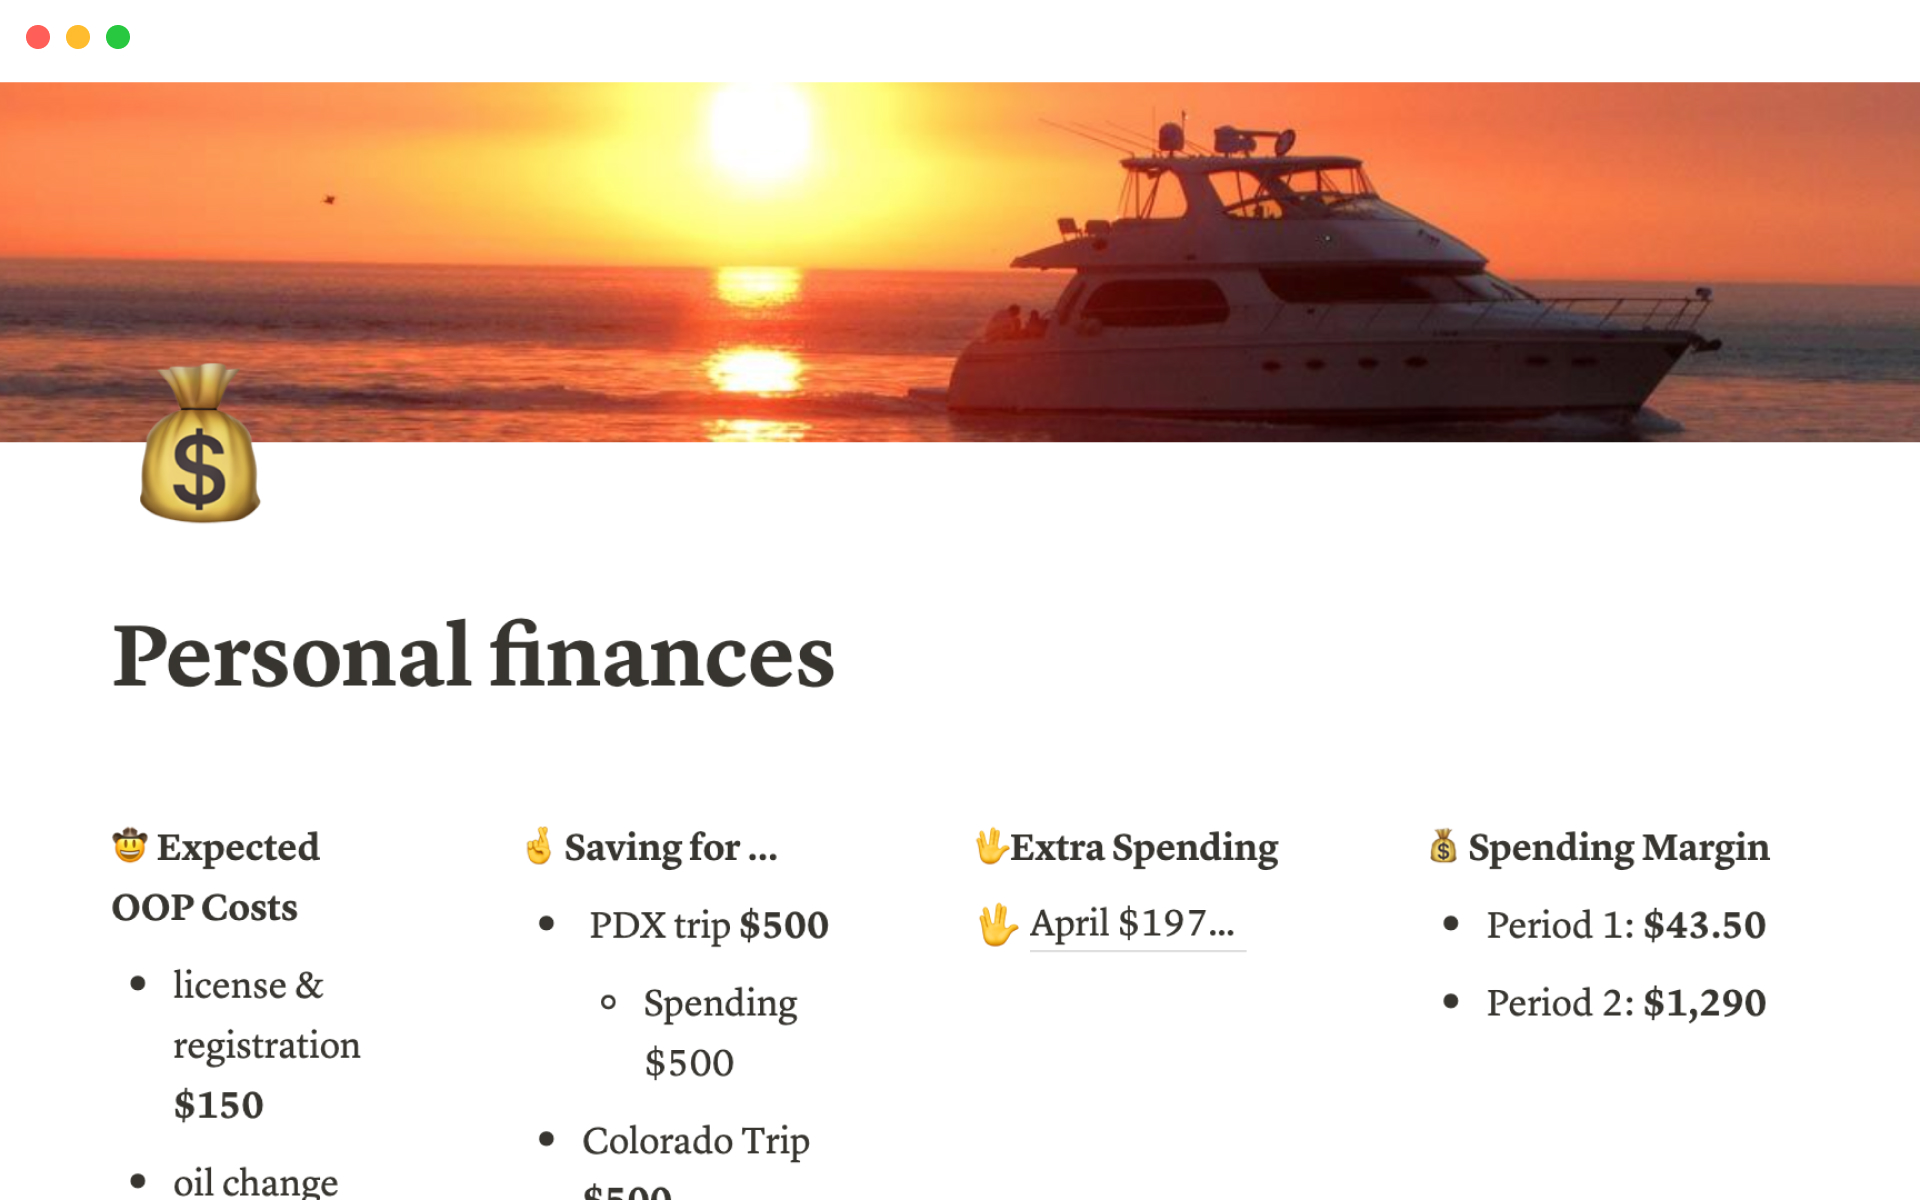 The desktop image for the Personal finances template